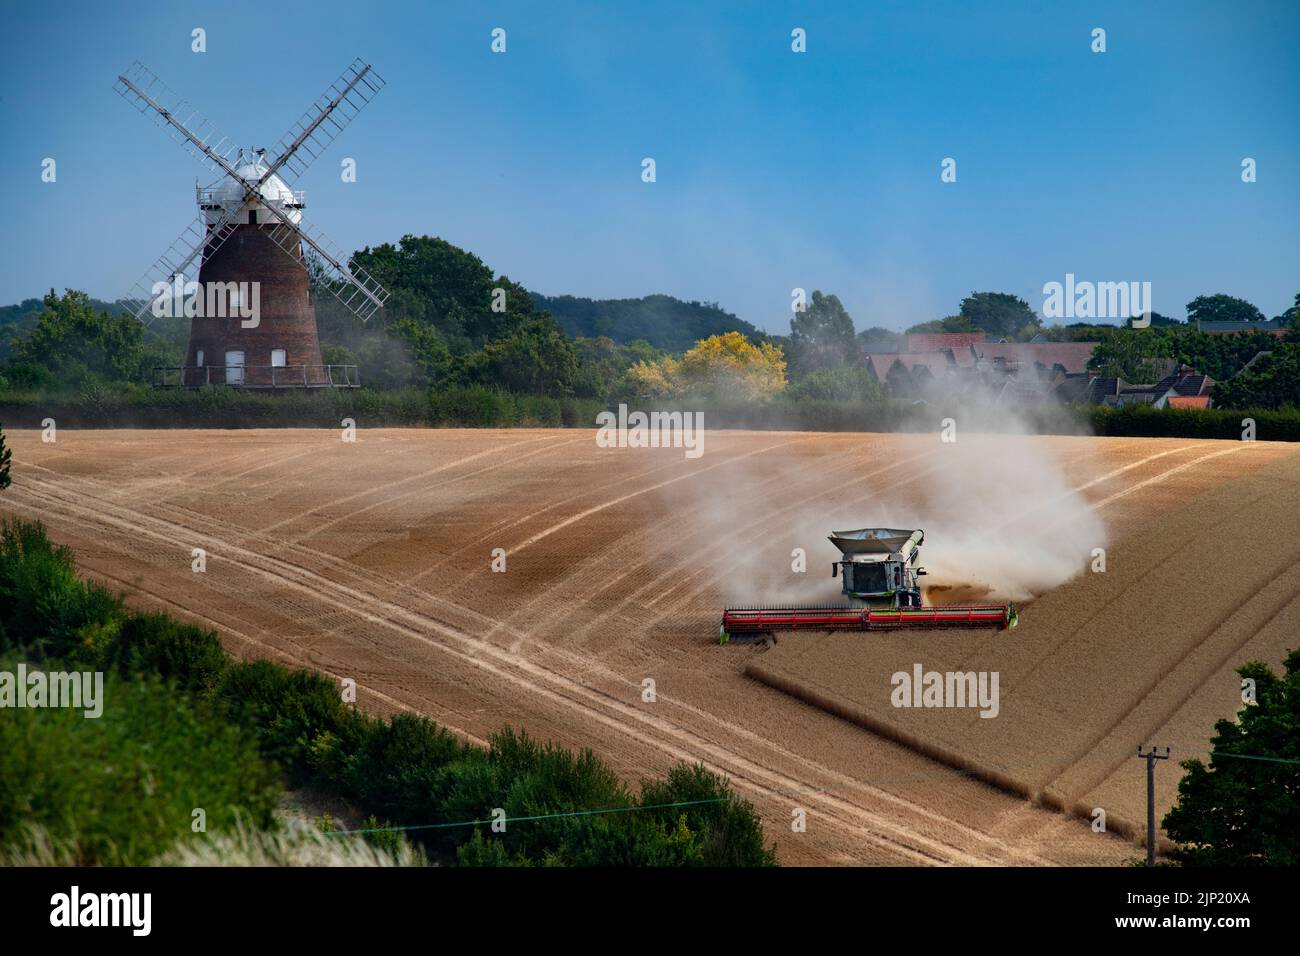 Thaxted, UK. 15th Aug, 2022. Thaxted Essex Late Harvest 15 August 2022 Seen here: The bucolic idyll of a late harvest scene in Thaxted North West Essex England. The 48 foot £600,000 Combine Harvester is seen hard at work in the shadow of the 19th century John Webb's Windmill. Farmer Simon Latham said the yield was 3.5 tons per acre, should have been 4 tons but there was not enough wet but the wheat had a 12% moisture content so Simon said it was a good harvest. Photograph Credit: BRIAN HARRIS/Alamy Live News Stock Photo